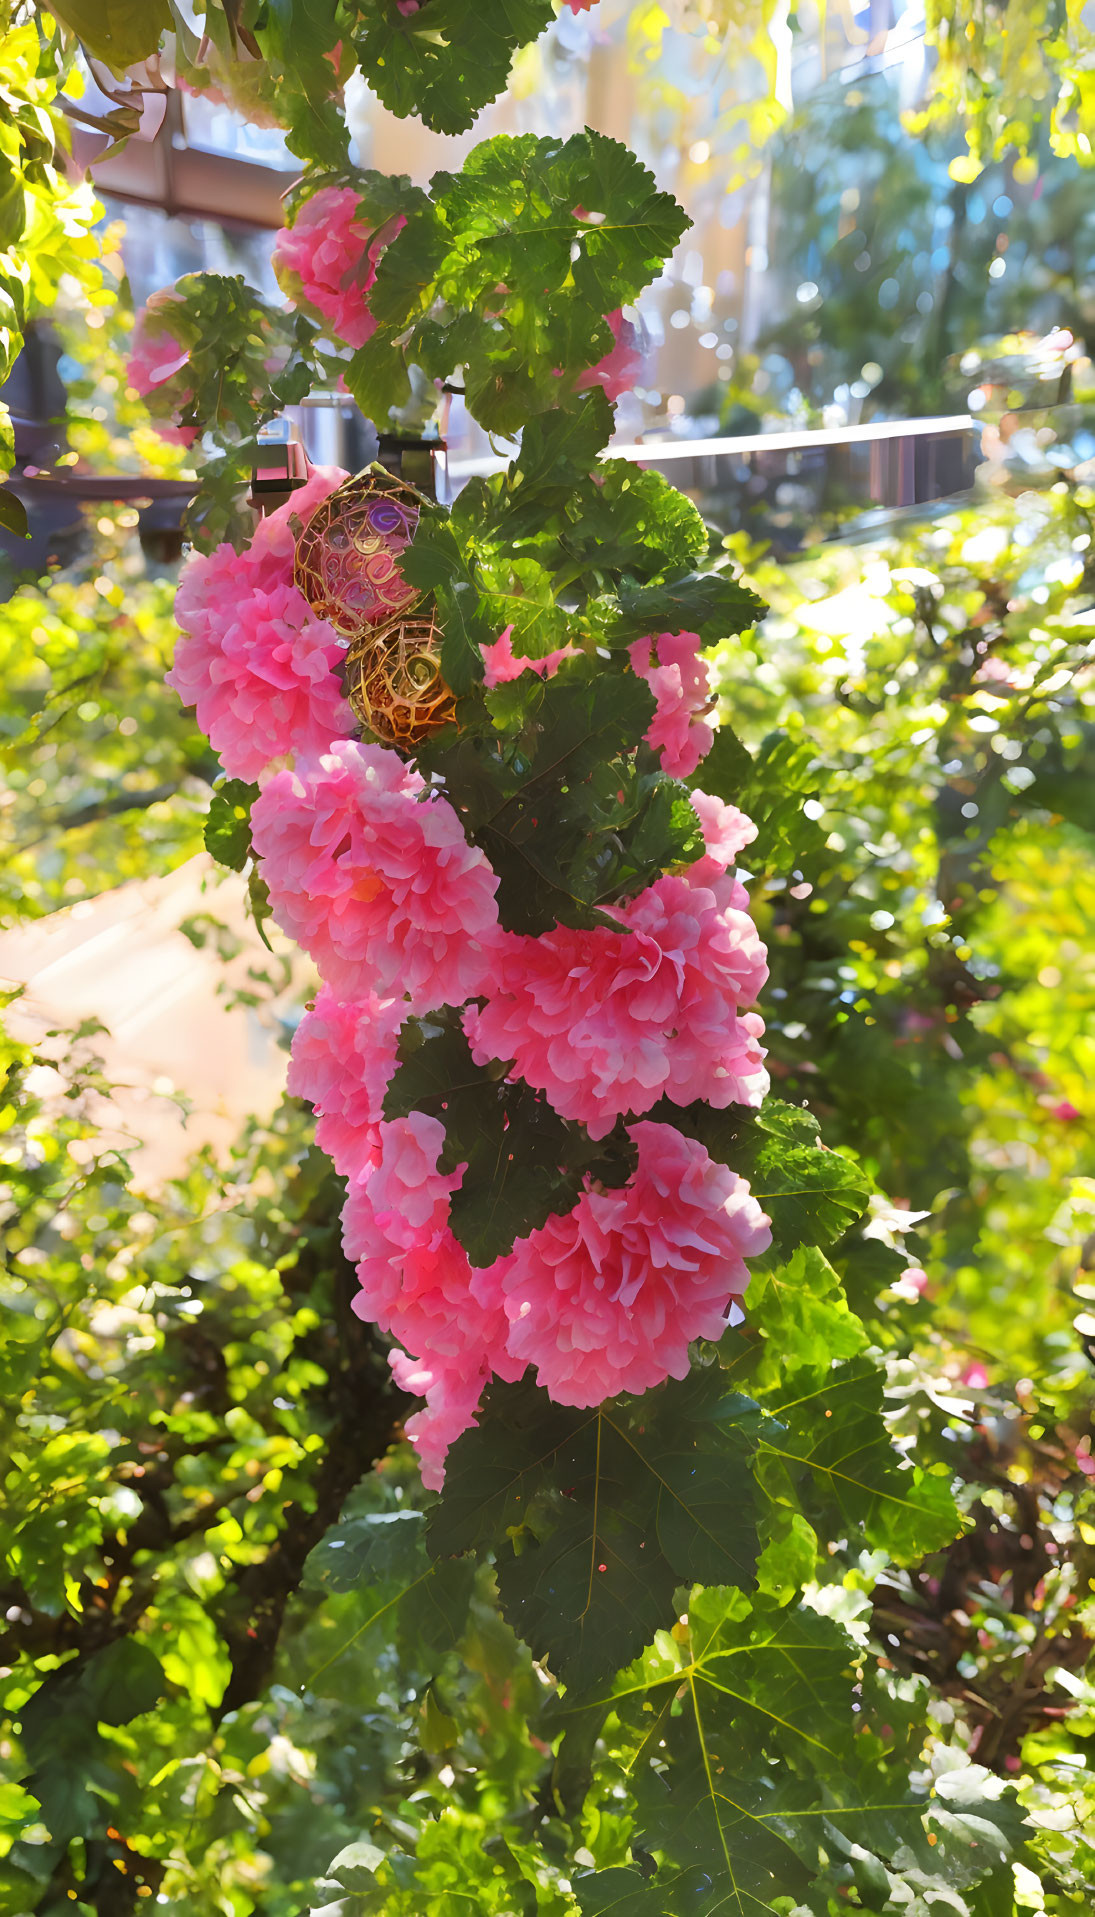 Vibrant pink flowers blooming on green shrub in urban oasis